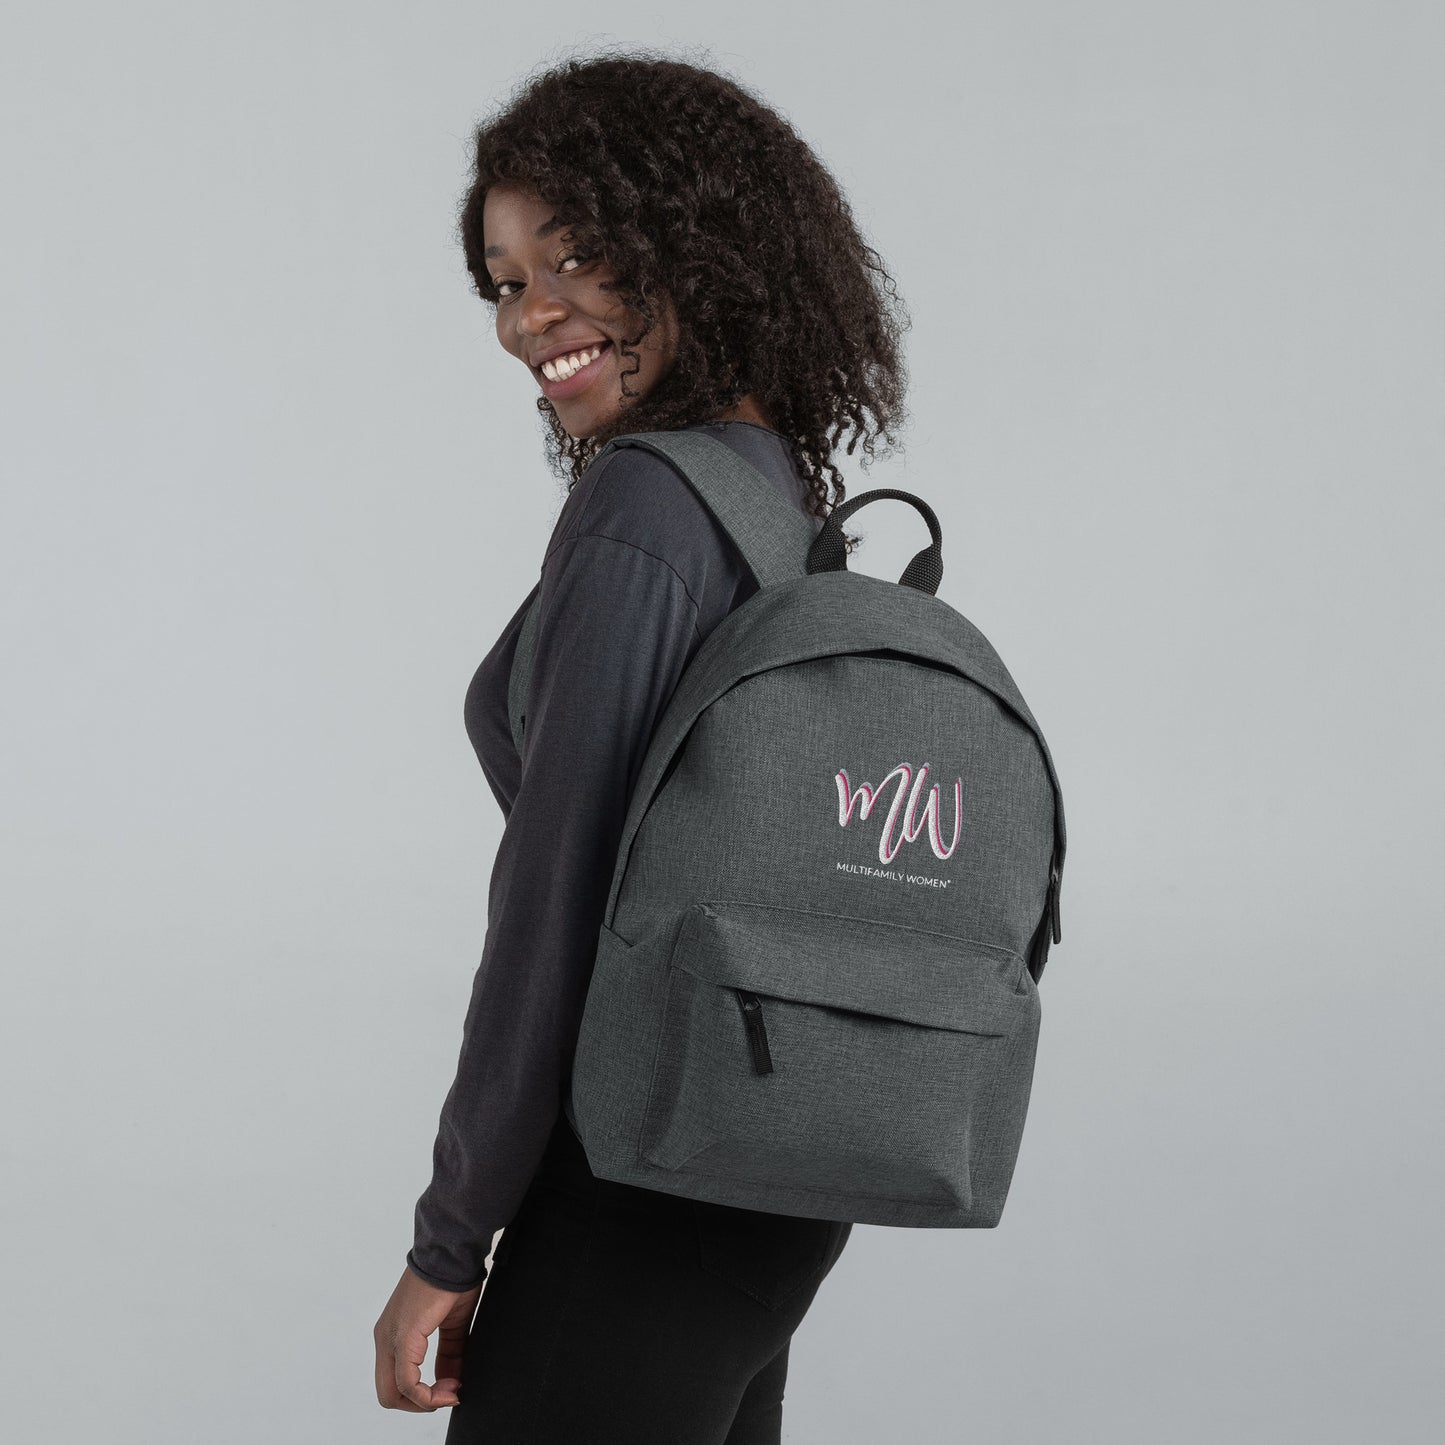 The Pathfinder - Embroidered Backpack by Multifamily Women®